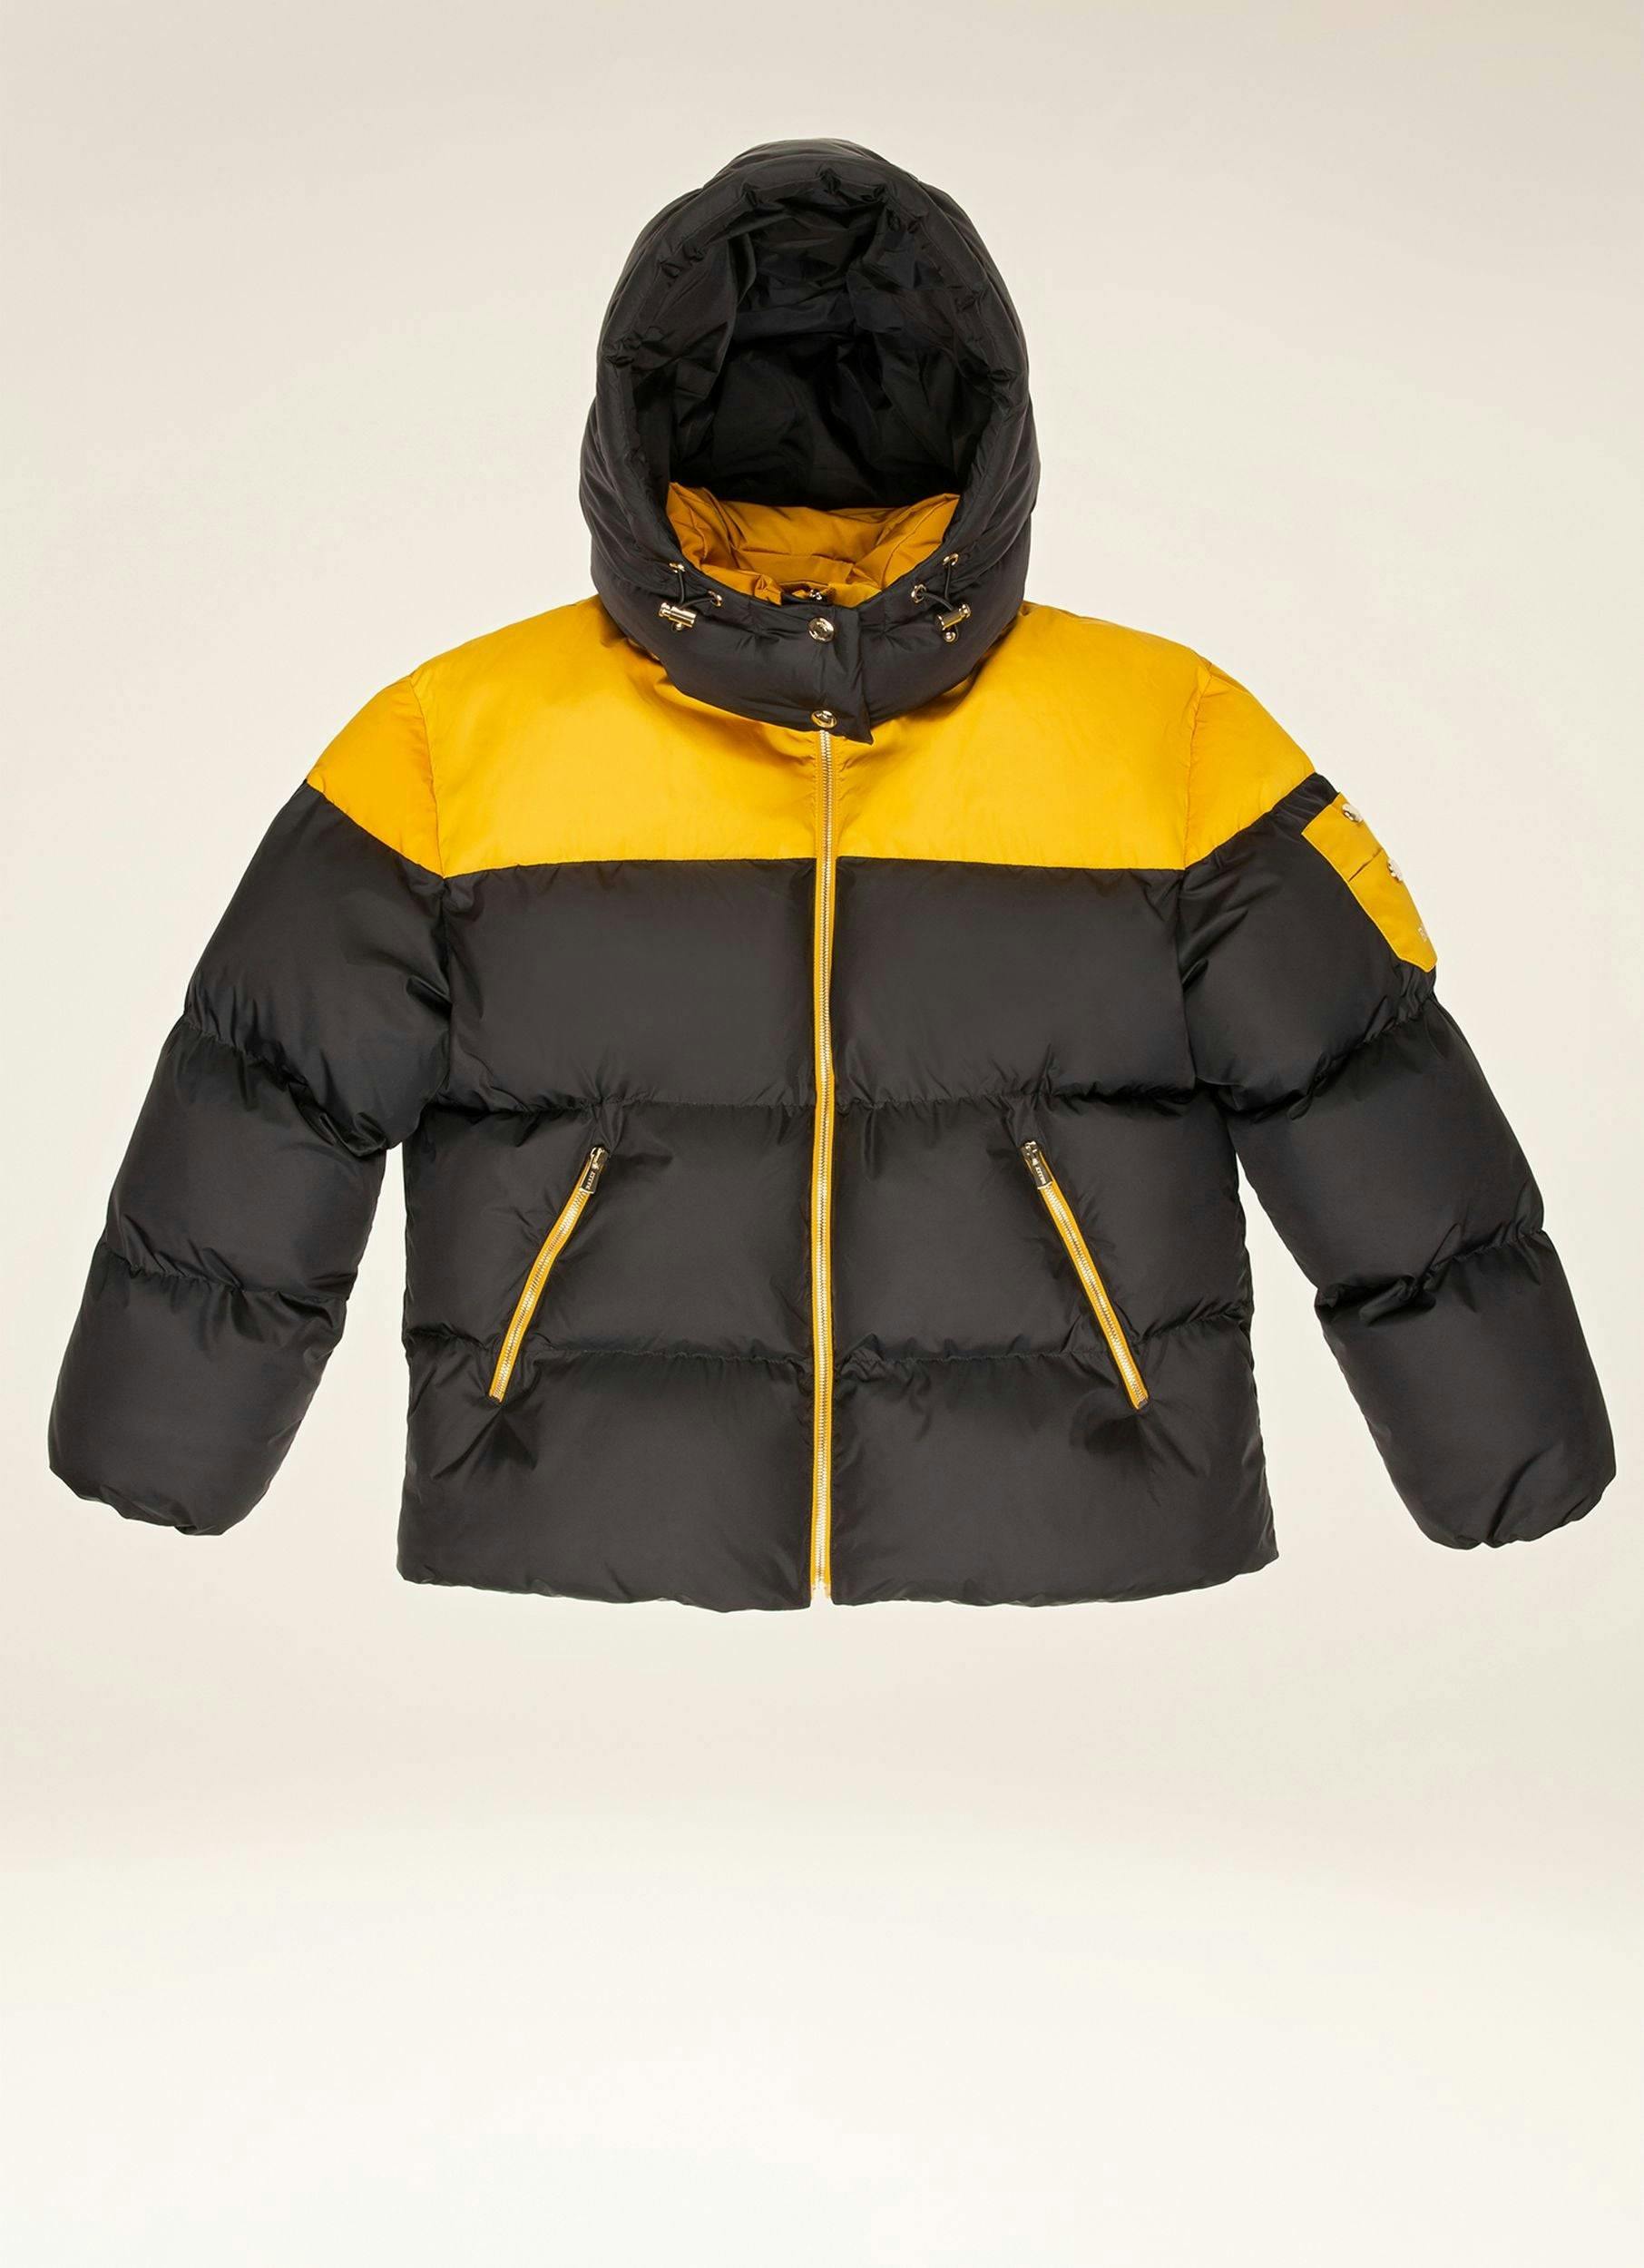 WINTER GOLD Outerwear In Black & Yellow         - Femme - Bally - 01